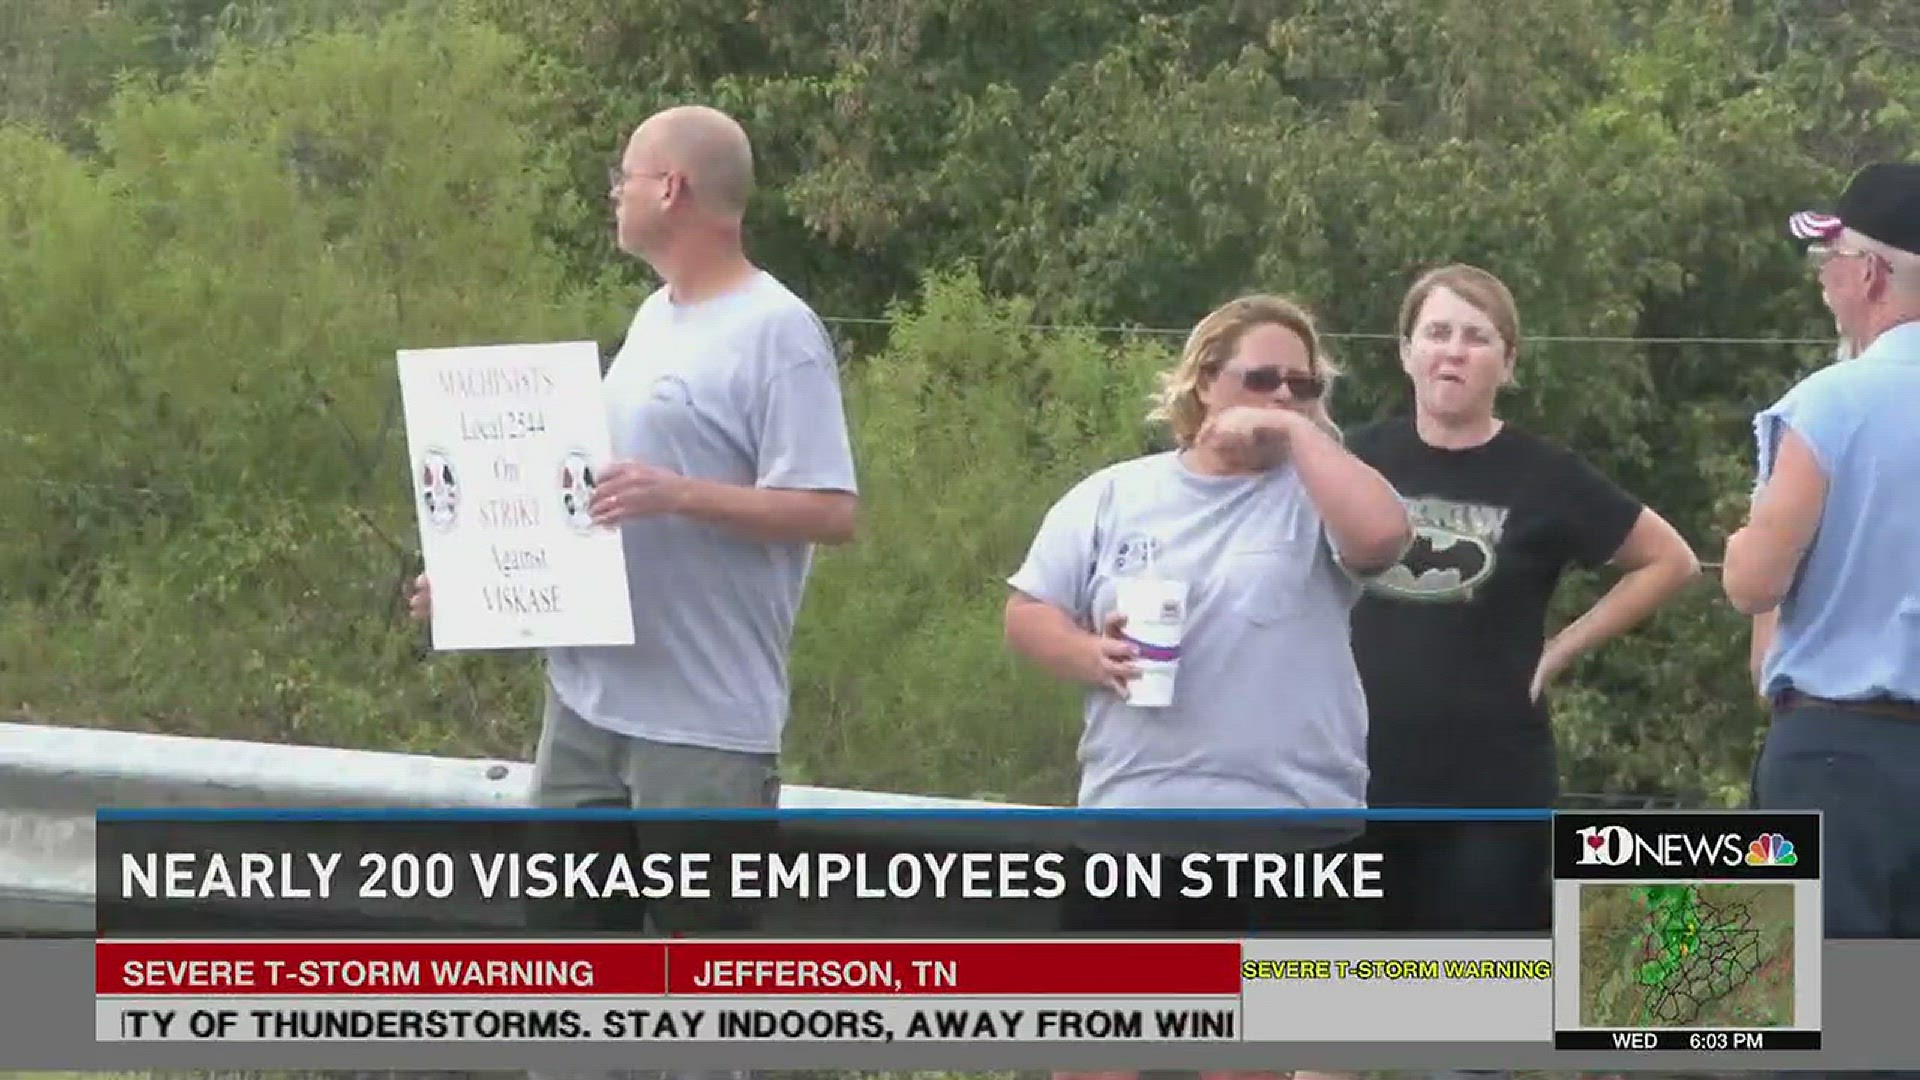 About 180 Viskase employees began a strike noon Wednesday. Workers say they want a fair contract. Sept. 30, 2015